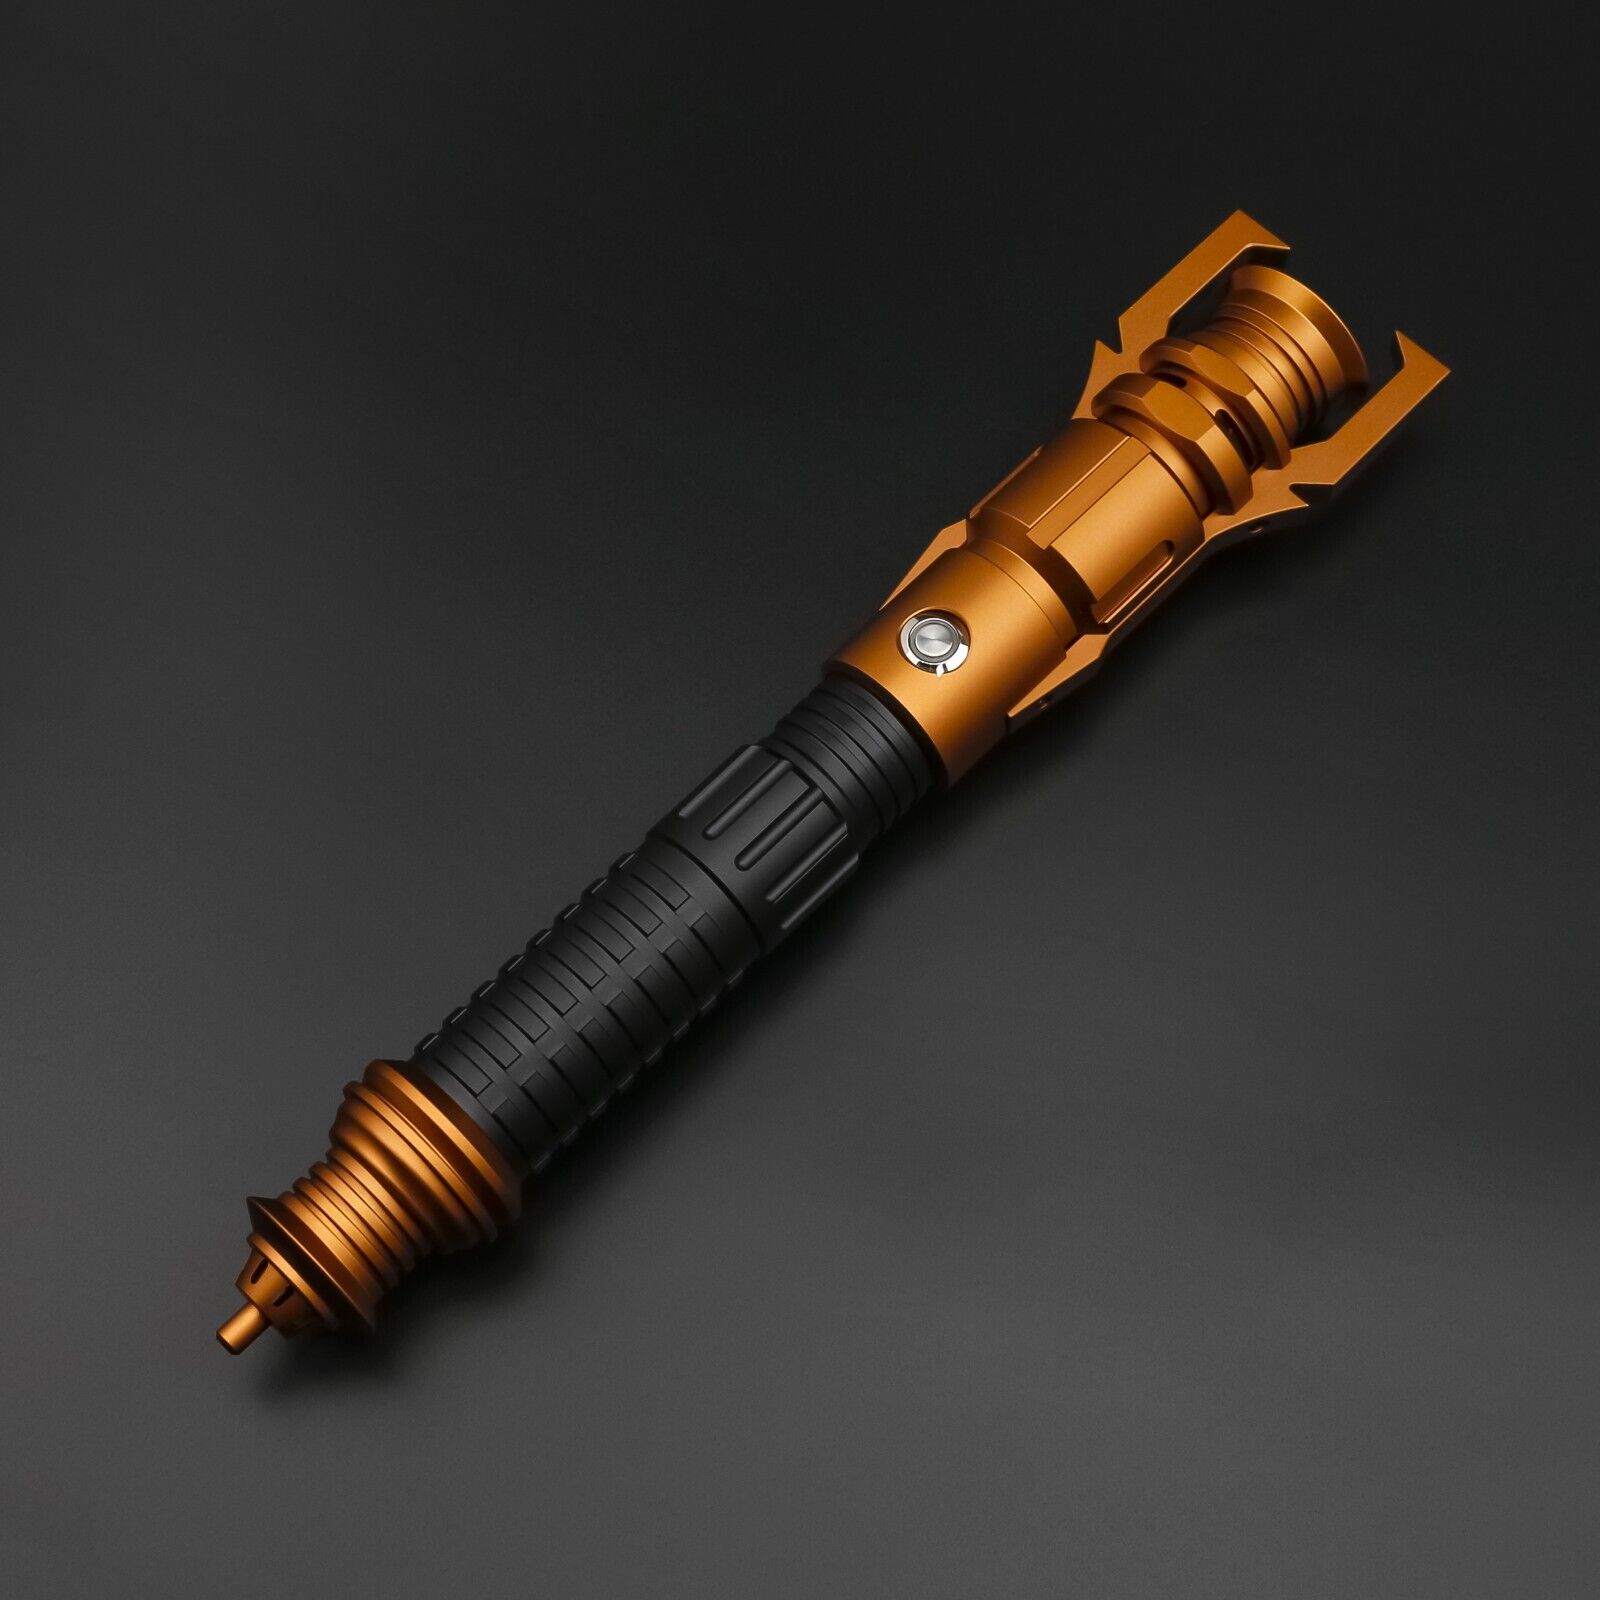 Mortis Vault Taron Malicos Pixel Lightsaber. From The Ravager Series SN-V4 PIXEL